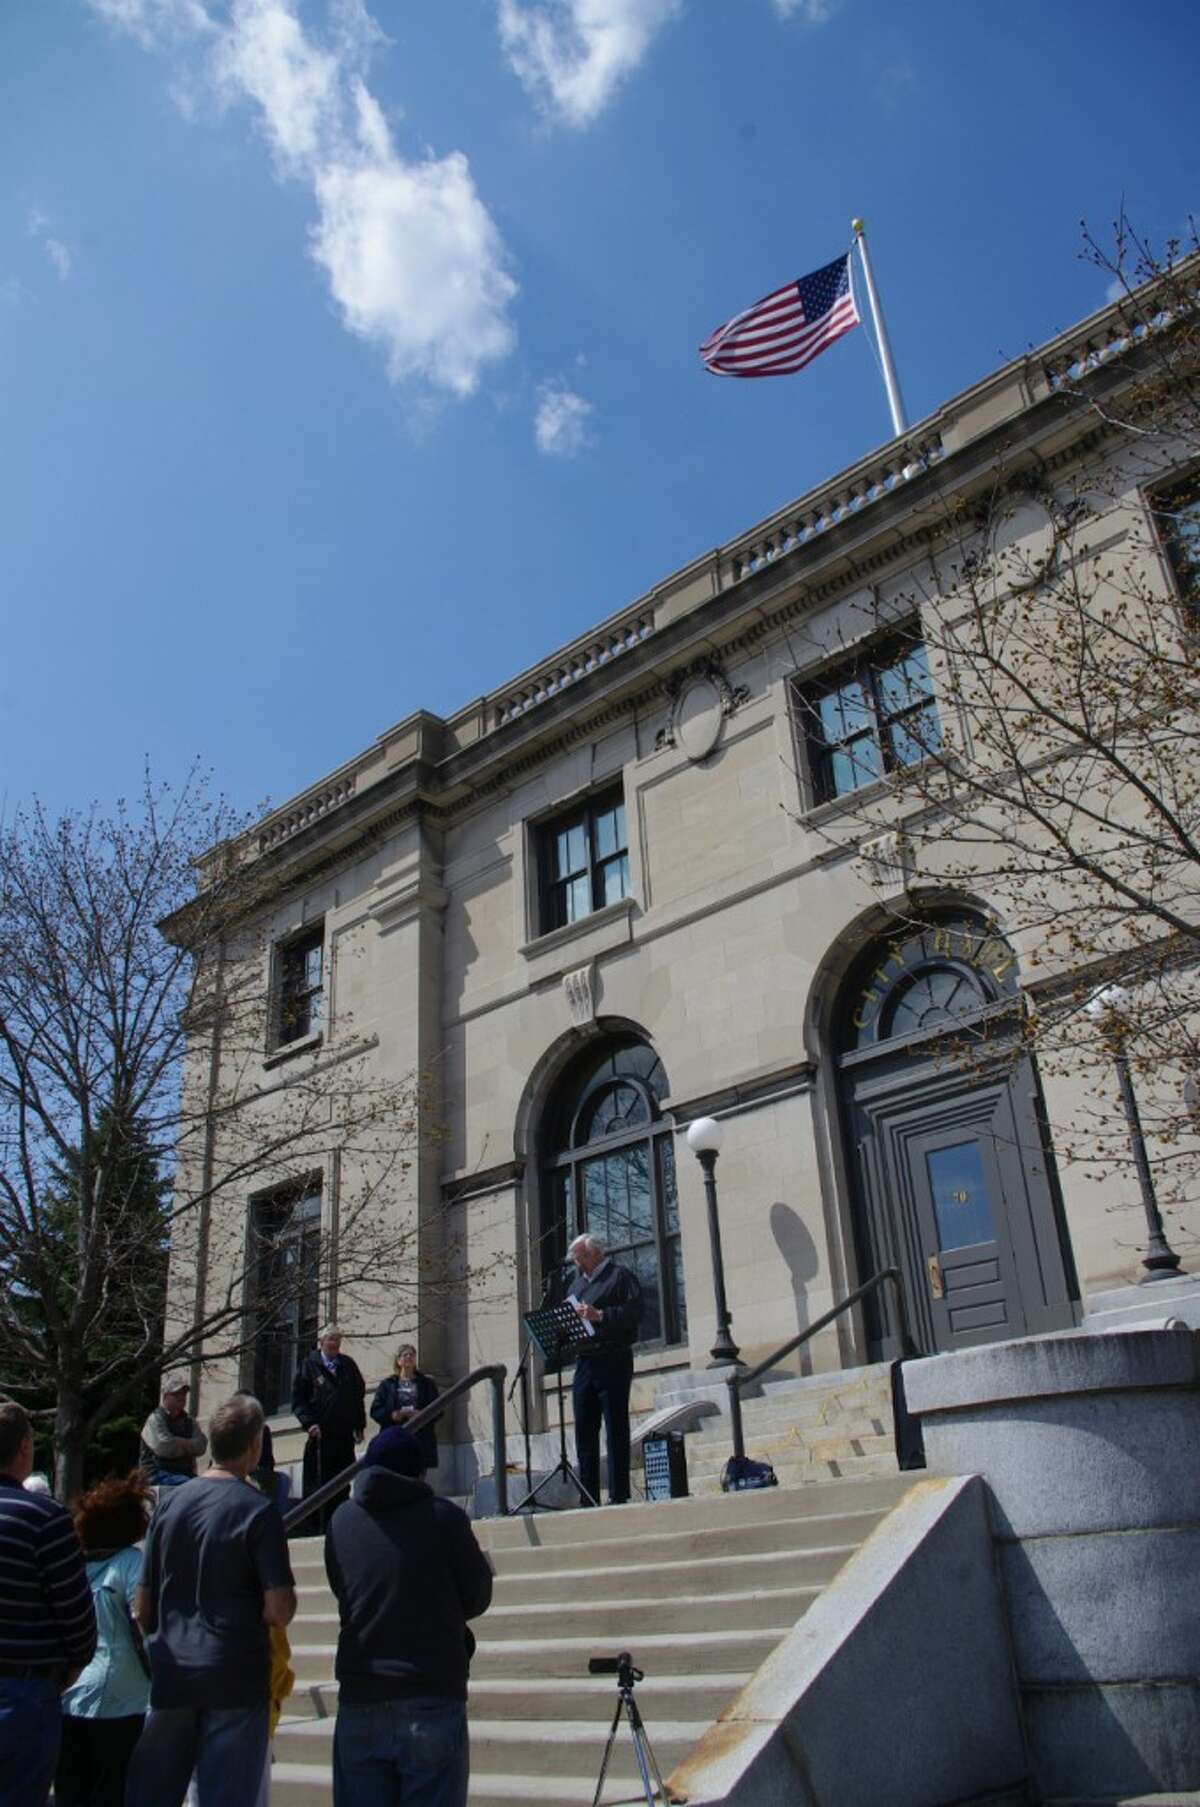 Keith Rupert served as the master of ceremonies for the observance of the National Day of Prayer at noon on Thursday on the steps of Manistee City Hall. (Dave Yarnell/News Advocate)